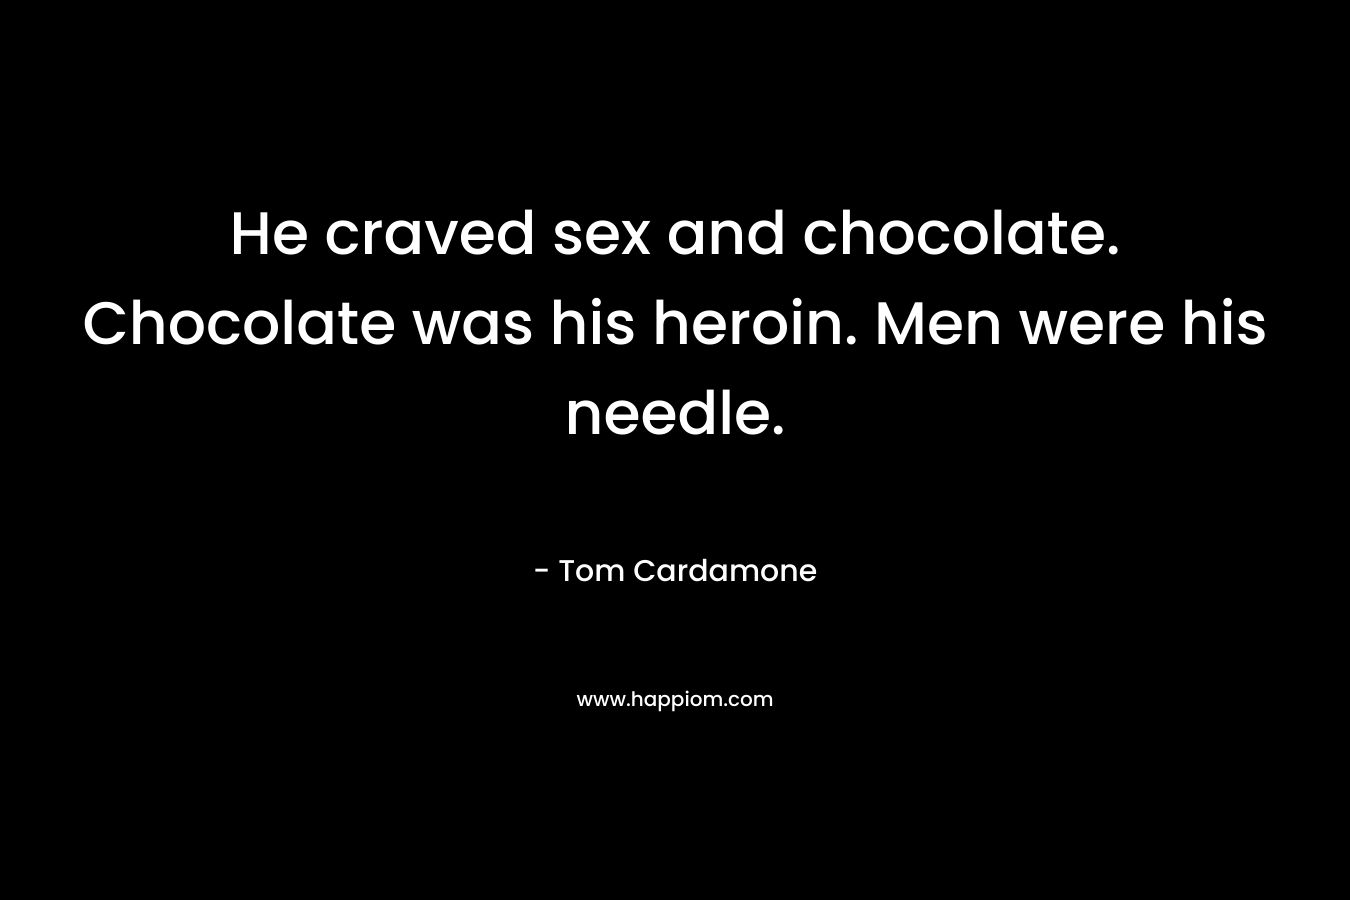 He craved sex and chocolate. Chocolate was his heroin. Men were his needle. – Tom Cardamone